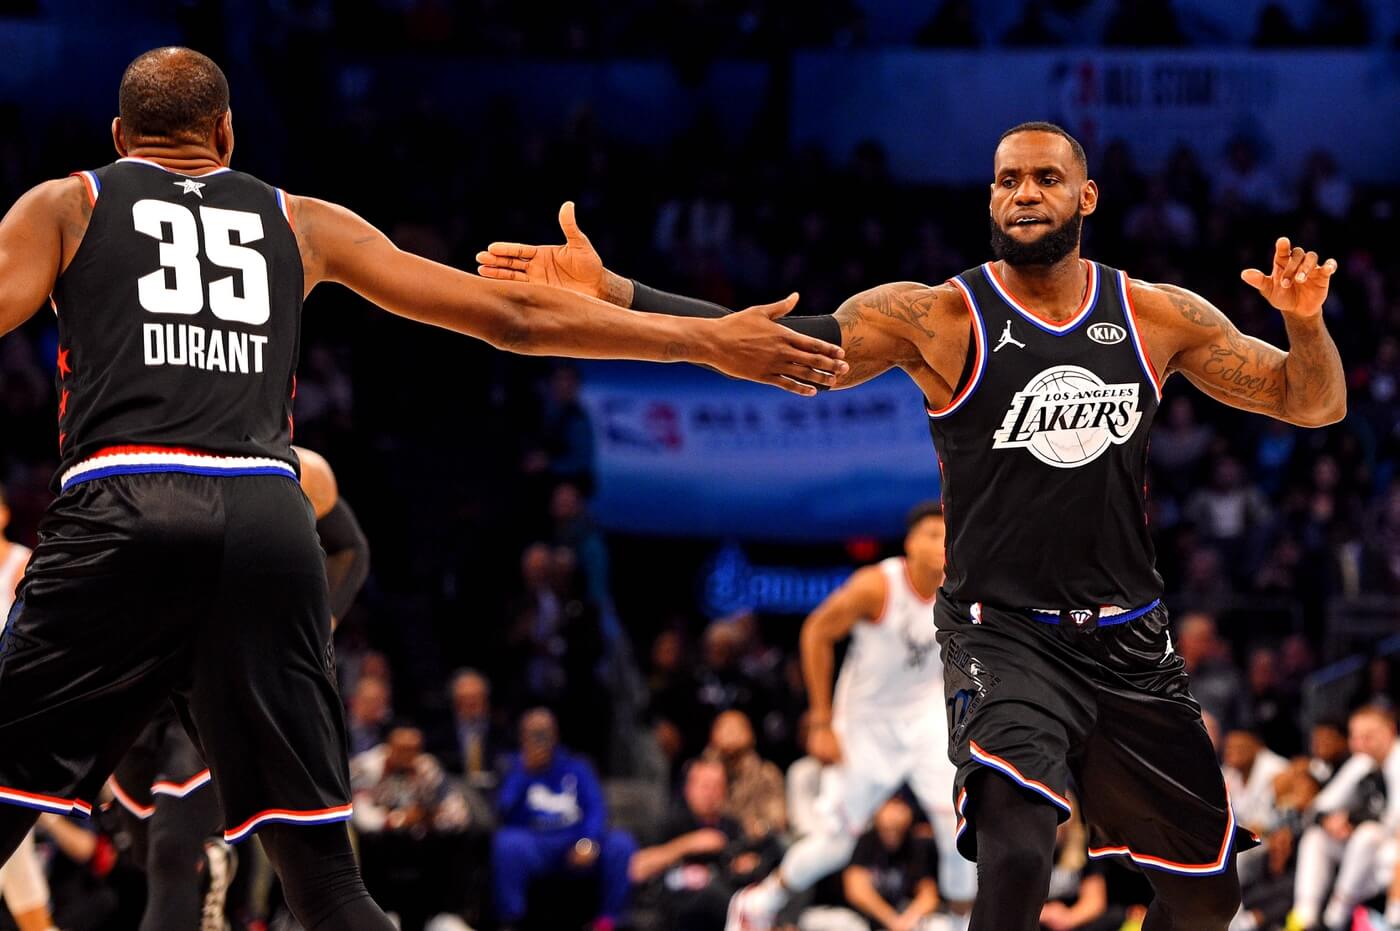 Feb 17, 2019; Charlotte, NC, USA; Team Lebron forward Lebron James of the Los Angeles Lakers (23) reacts with Team Lebron forward Kevin Durant of the Golden State Warrior (35) during the 2019 NBA All-Star Game at Spectrum Center.